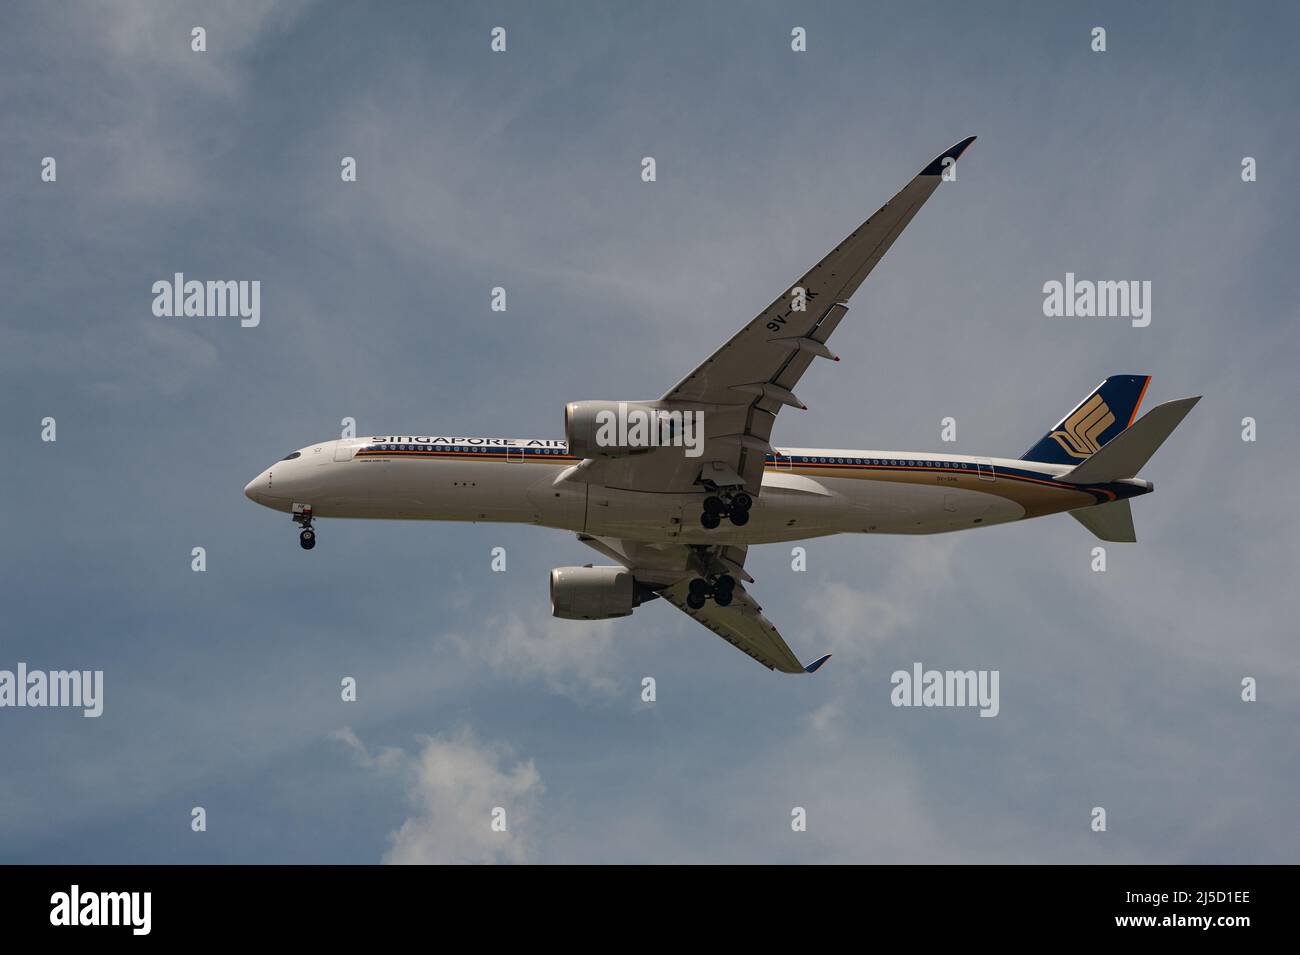 May 01, 2021, Singapore, Republic of Singapore, Asia - A Singapore Airlines Airbus A350-900 passenger aircraft with registration 9V-SHK on approach to Changi International Airport during the ongoing Corona crisis. Singapore Airlines is a member of the Star Alliance airline alliance. [automated translation] Stock Photo